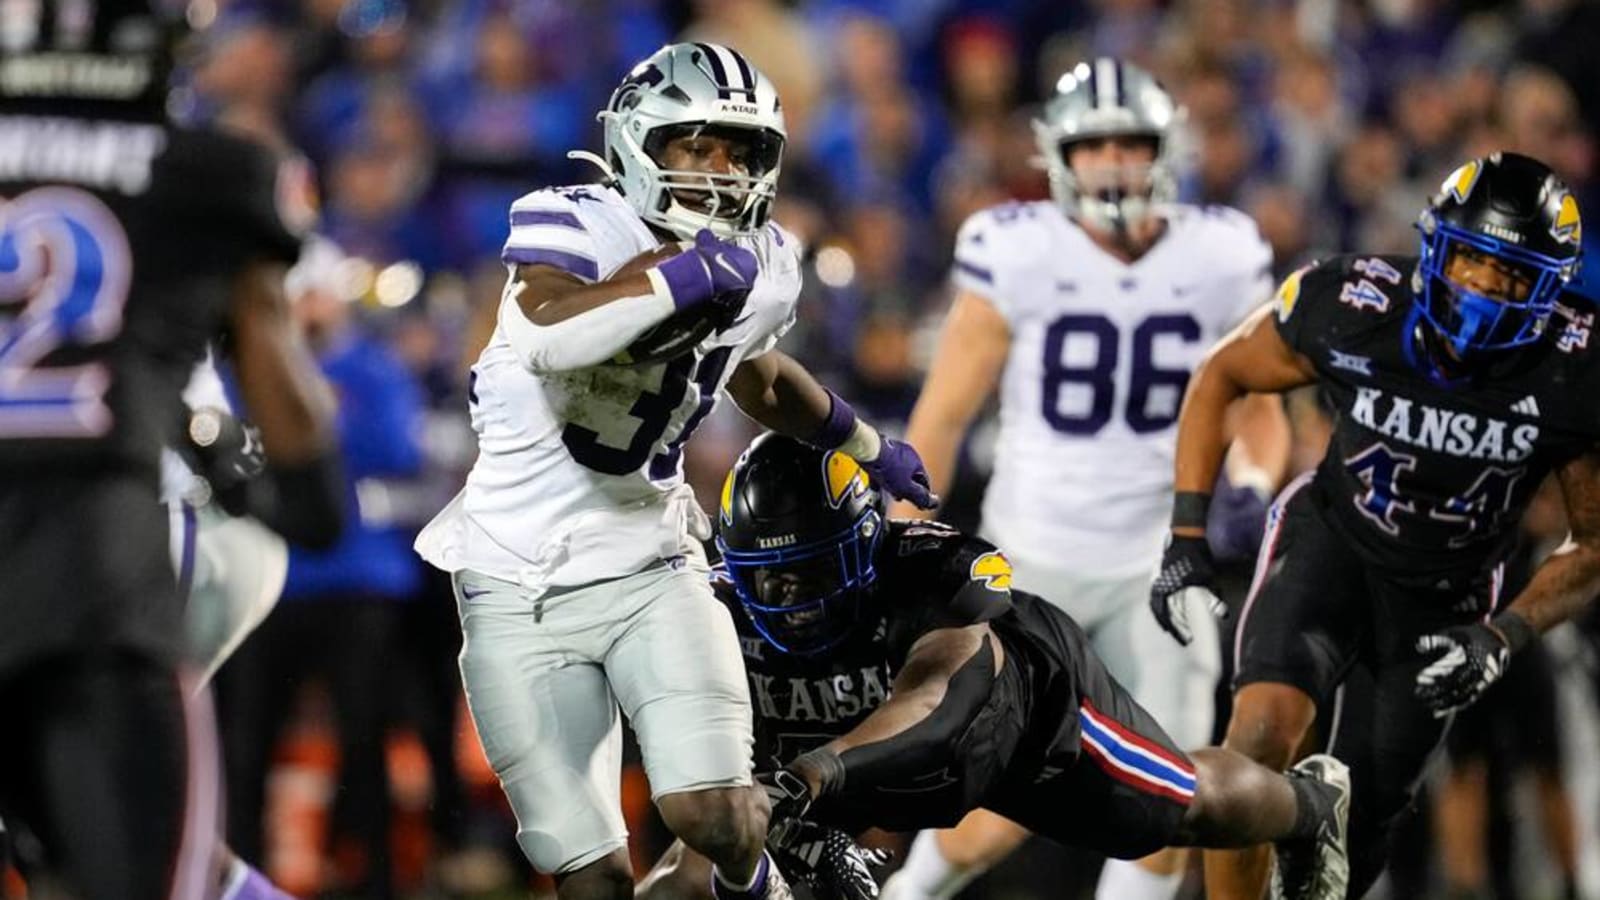 K-State Dominates Kansas in Recruiting the Sunflower State